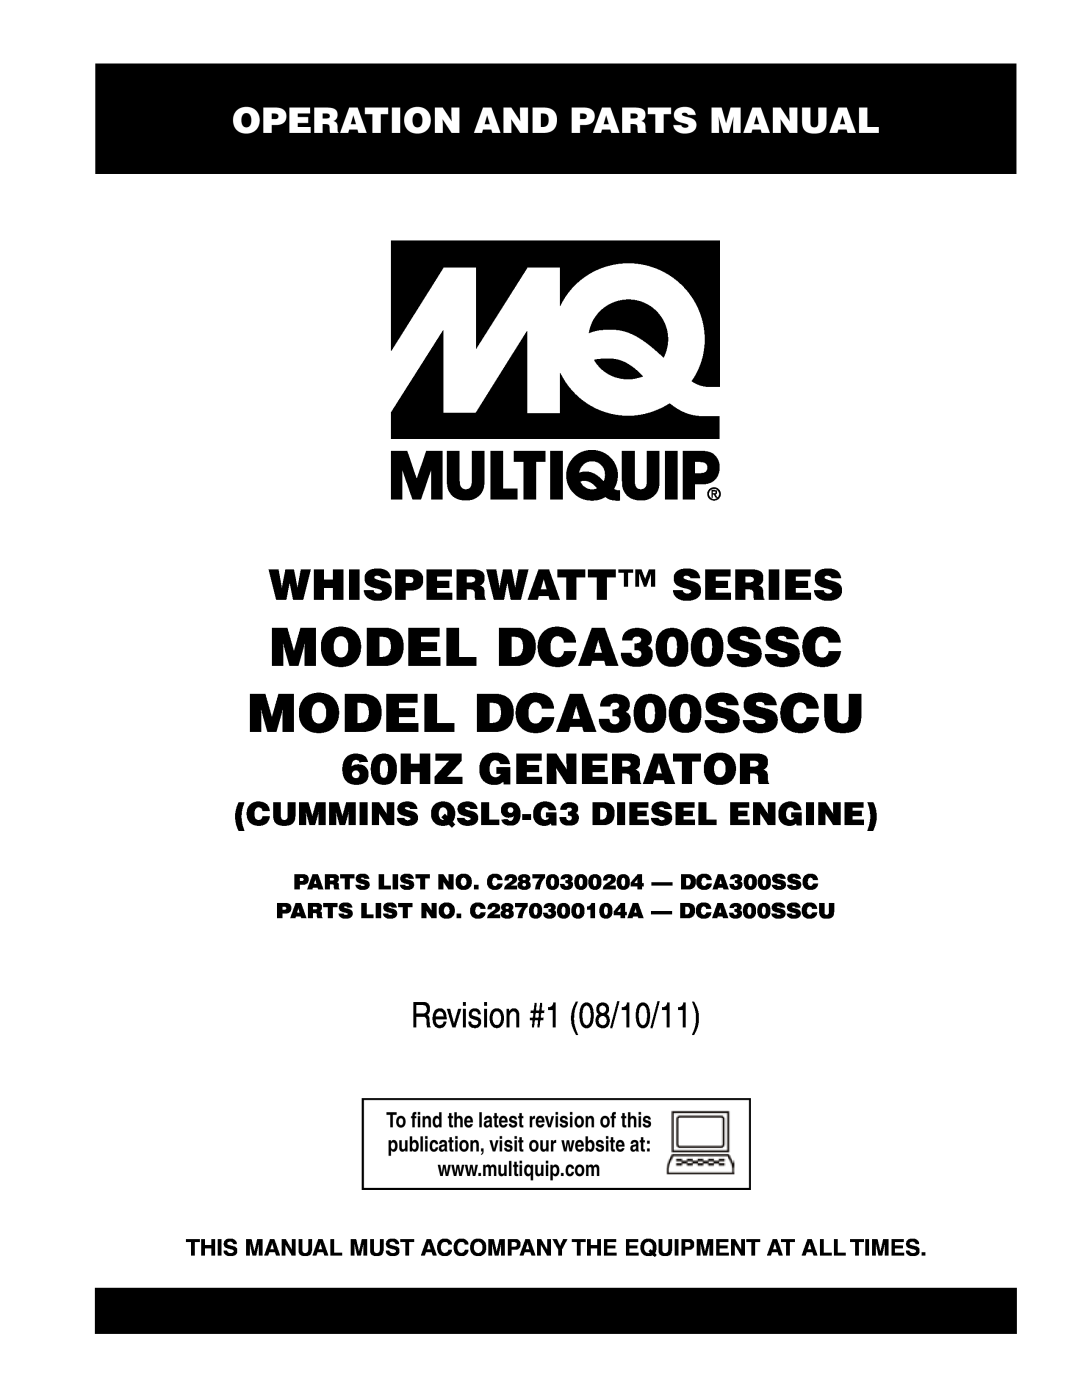 Multiquip DCA300SSCU manual Operation and Parts Manual, This Manual Must Accompany The Equipment At All Times 